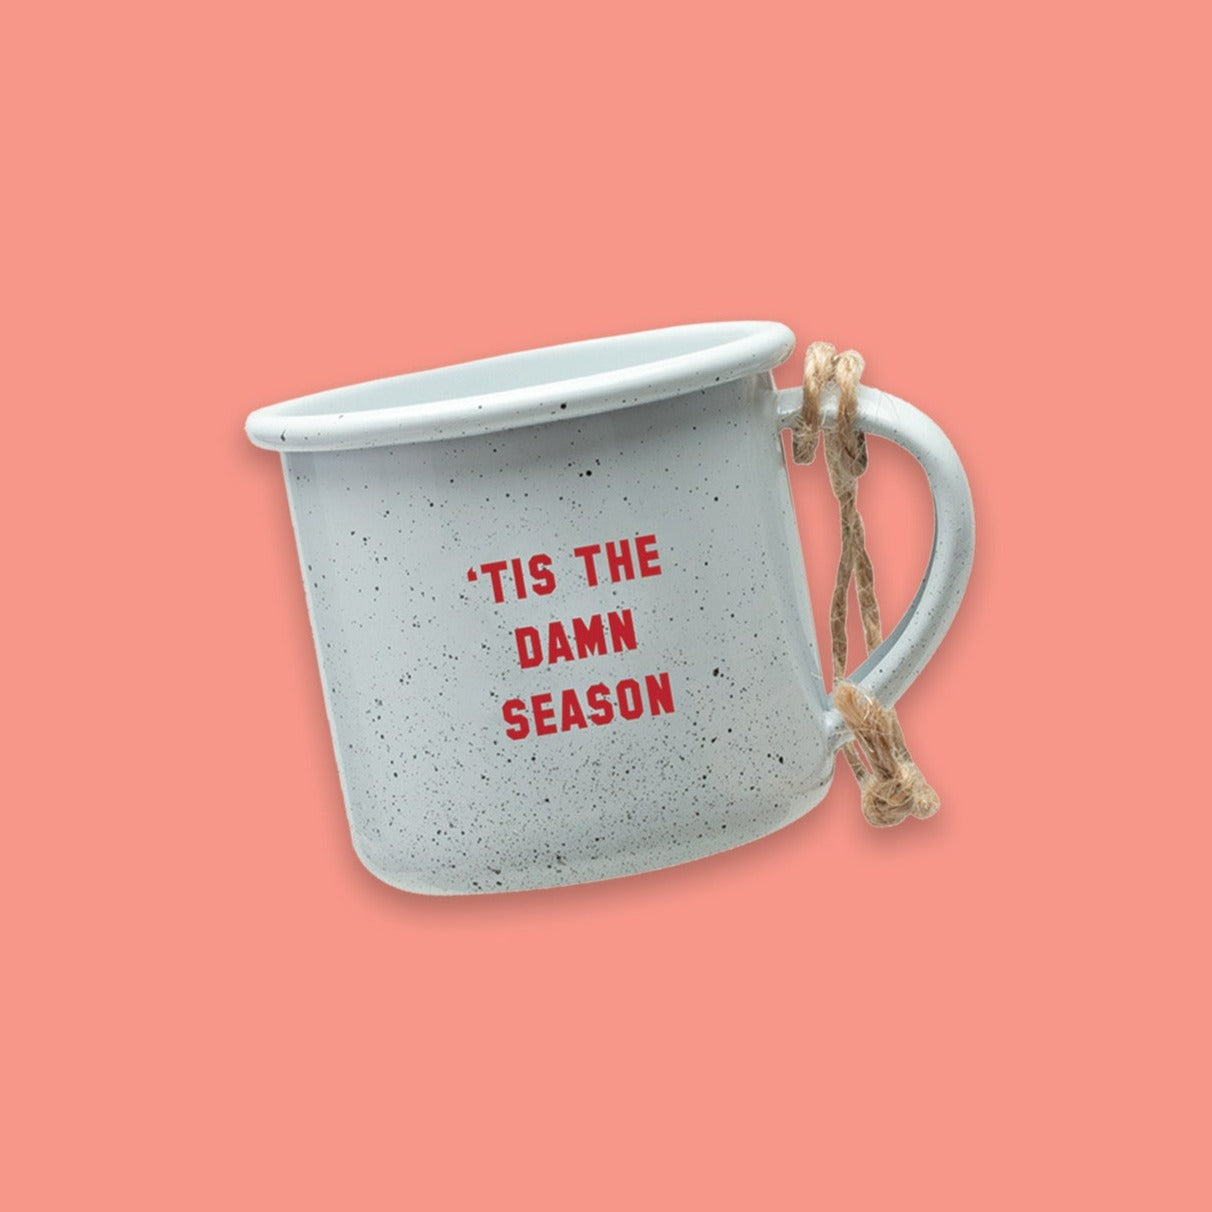 On a coral pink background sits a white mini campfire mug with black specks. It says "'TIS THE DAMN SEASON" in red collegiate lettering. It has twine on the handle.